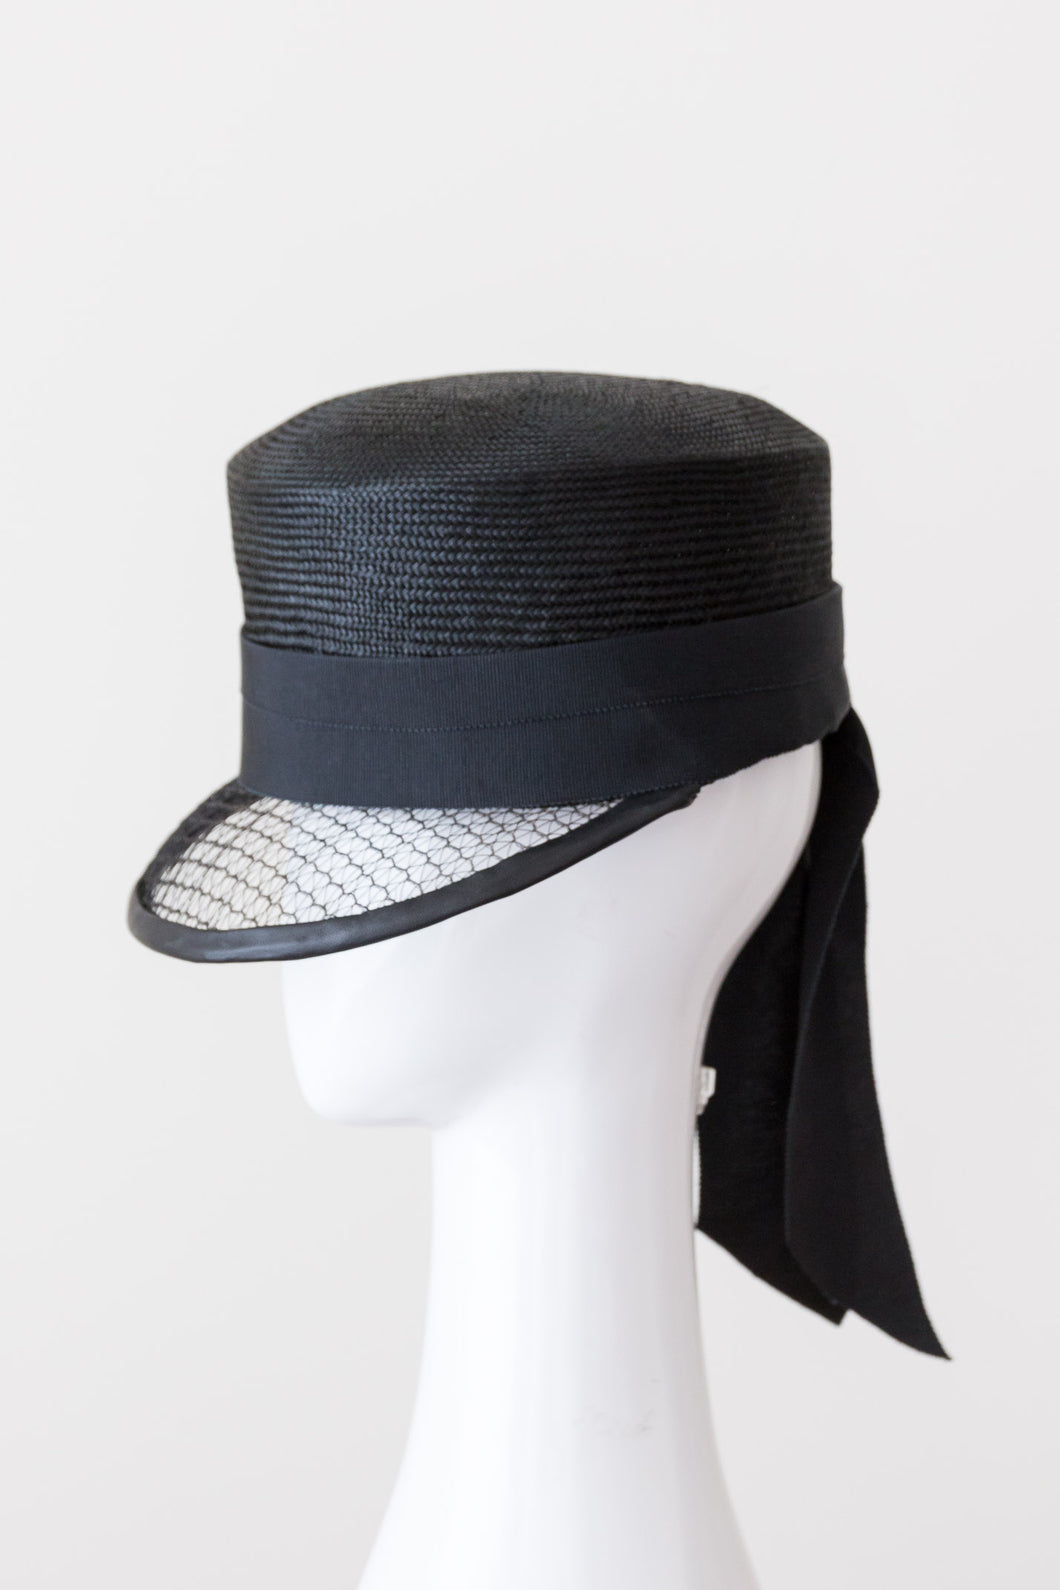 Black Cap with Veiled Visor by Felicity Northeast Millinery